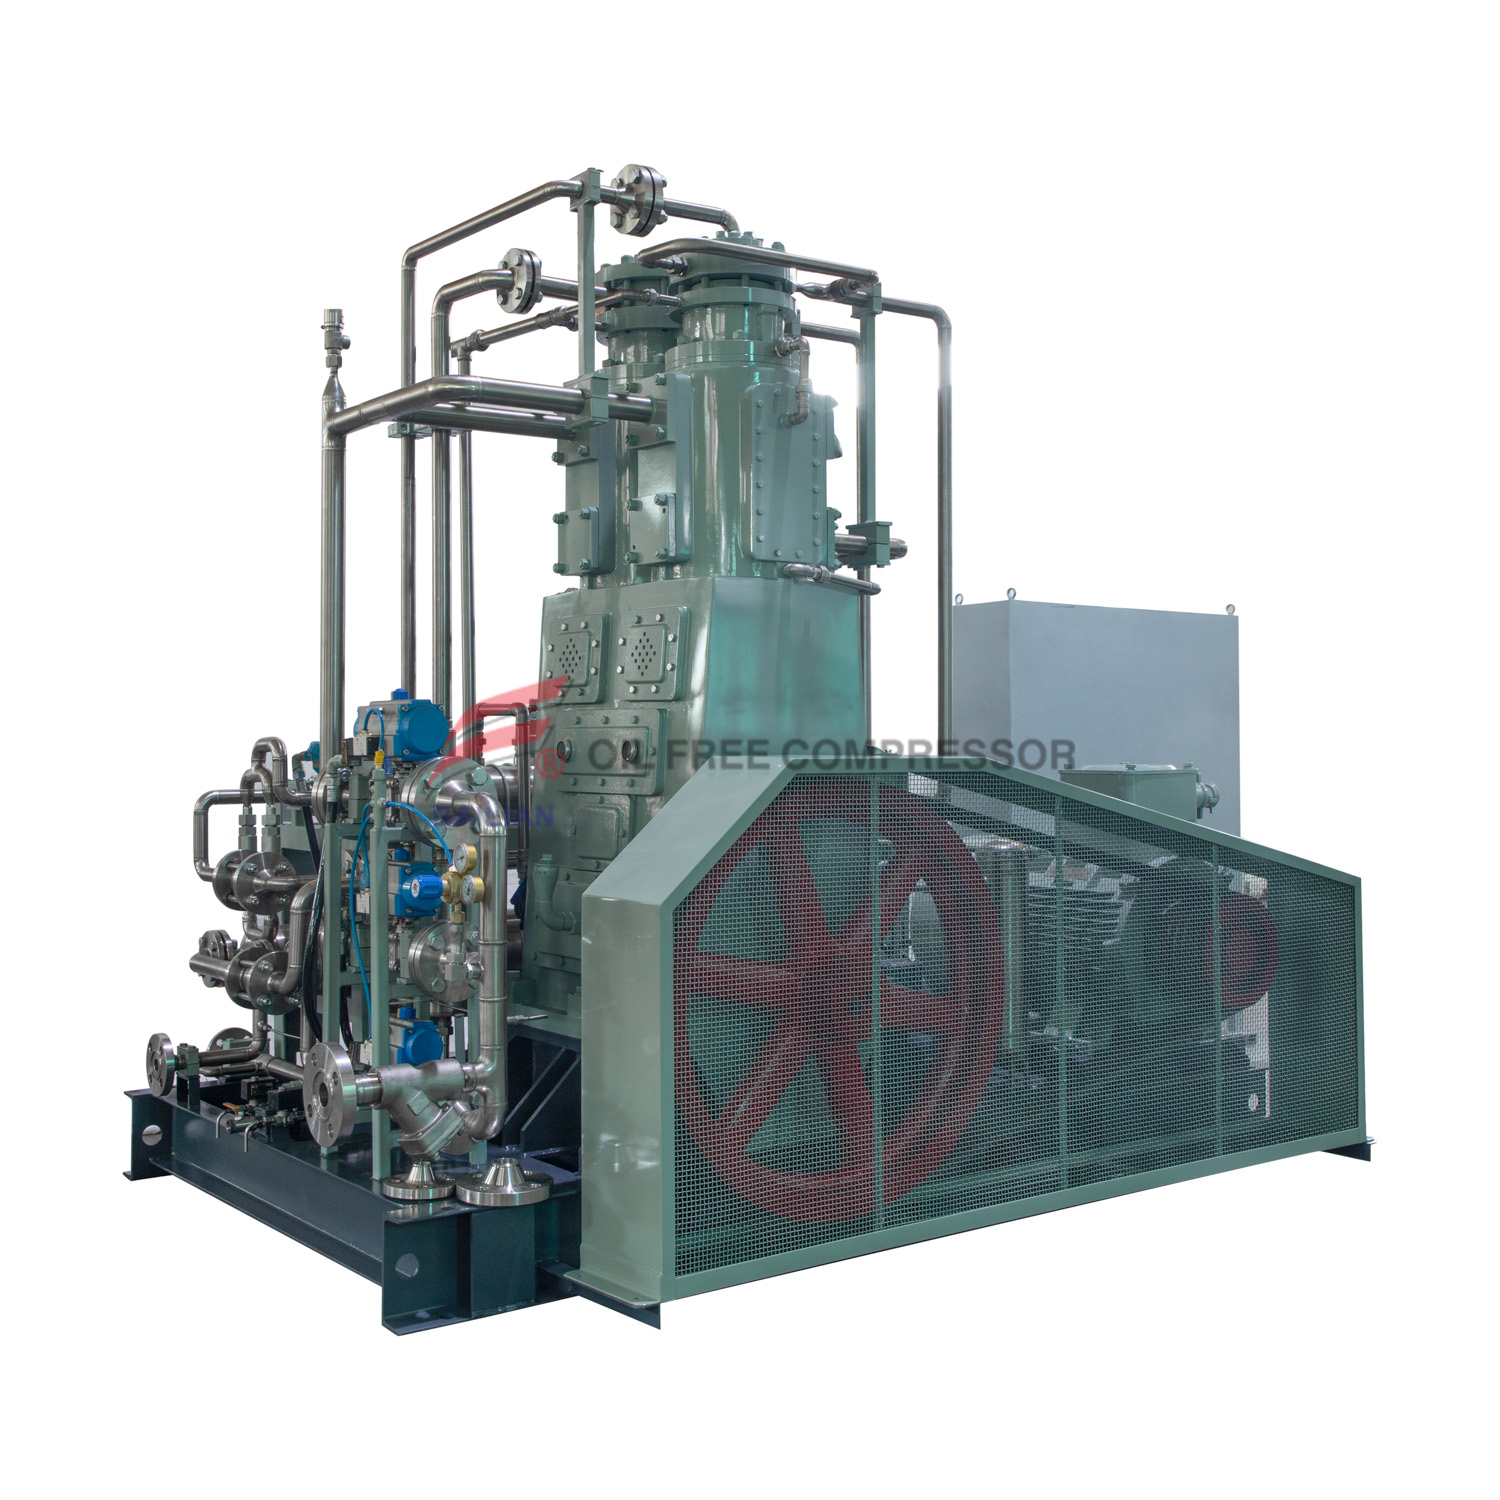 Reciprocating Piston Vertical Sled Mounted Type CO2 Compressor ZW-600/6-40